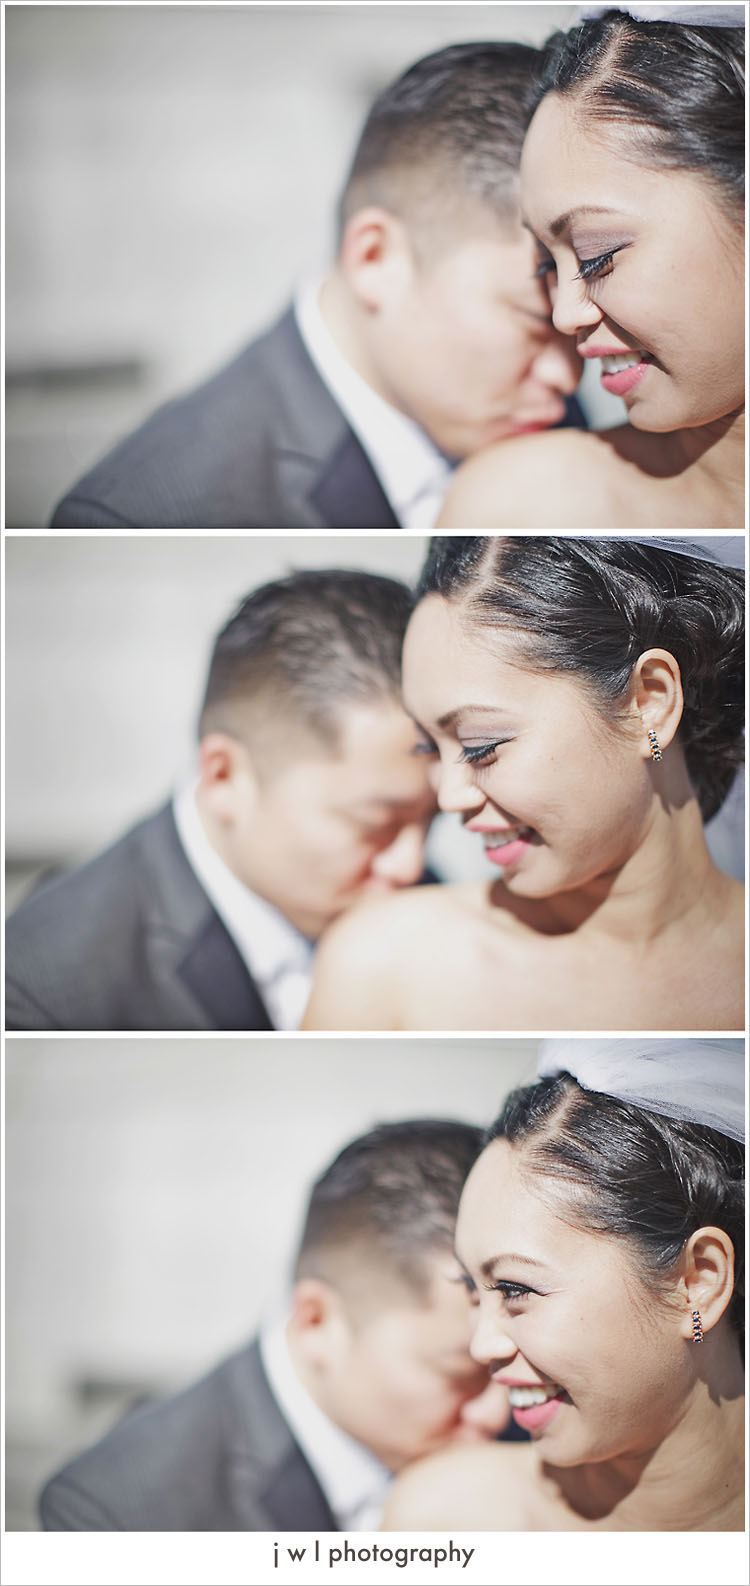 april + archie, Cathedral of Christ the Light, j w l photography _14